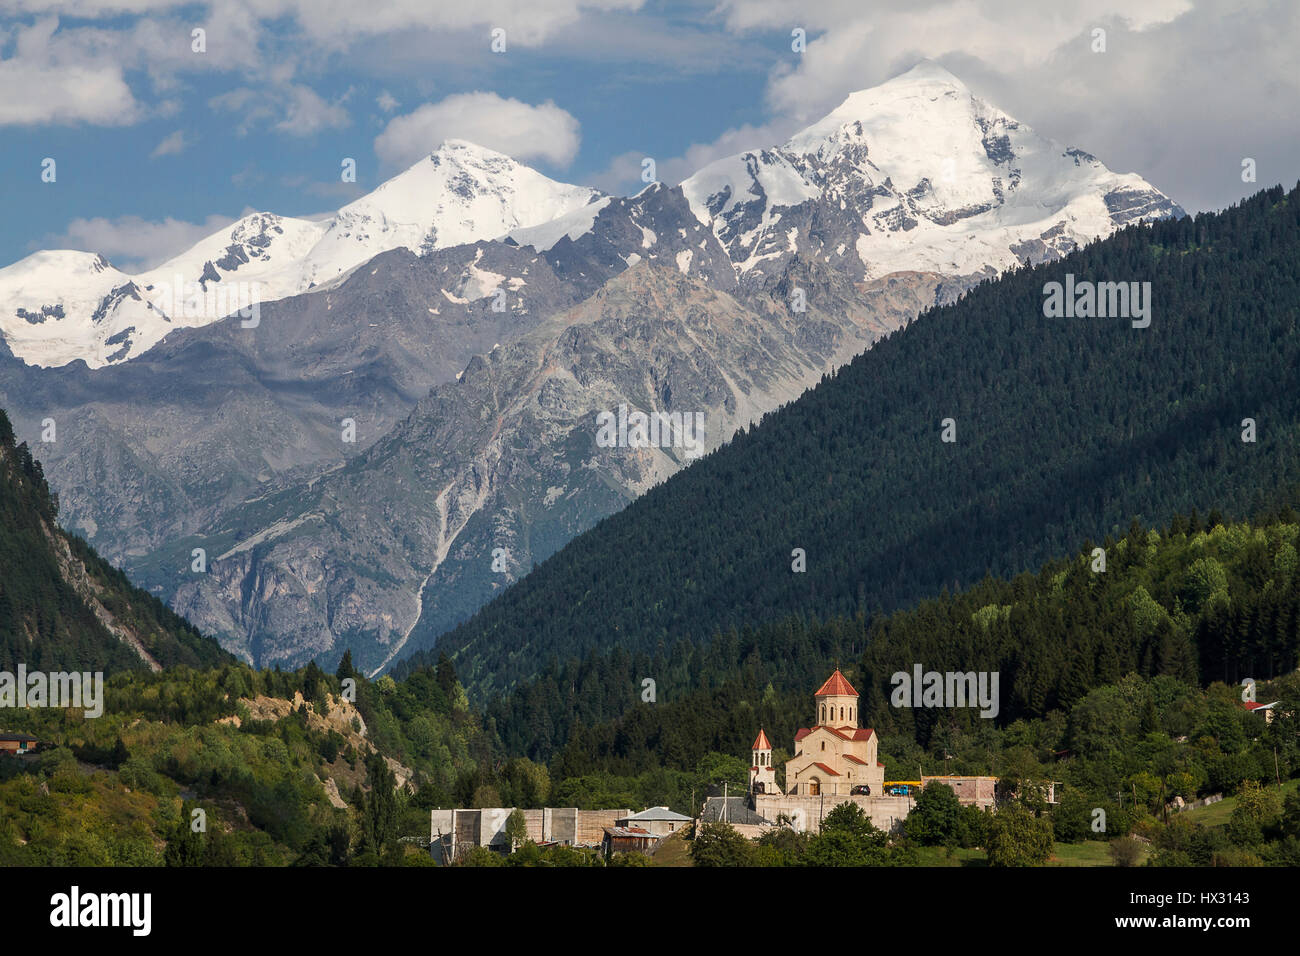 Church in Mestia, Georgia with he Caucasus Mountains in the background. Stock Photo